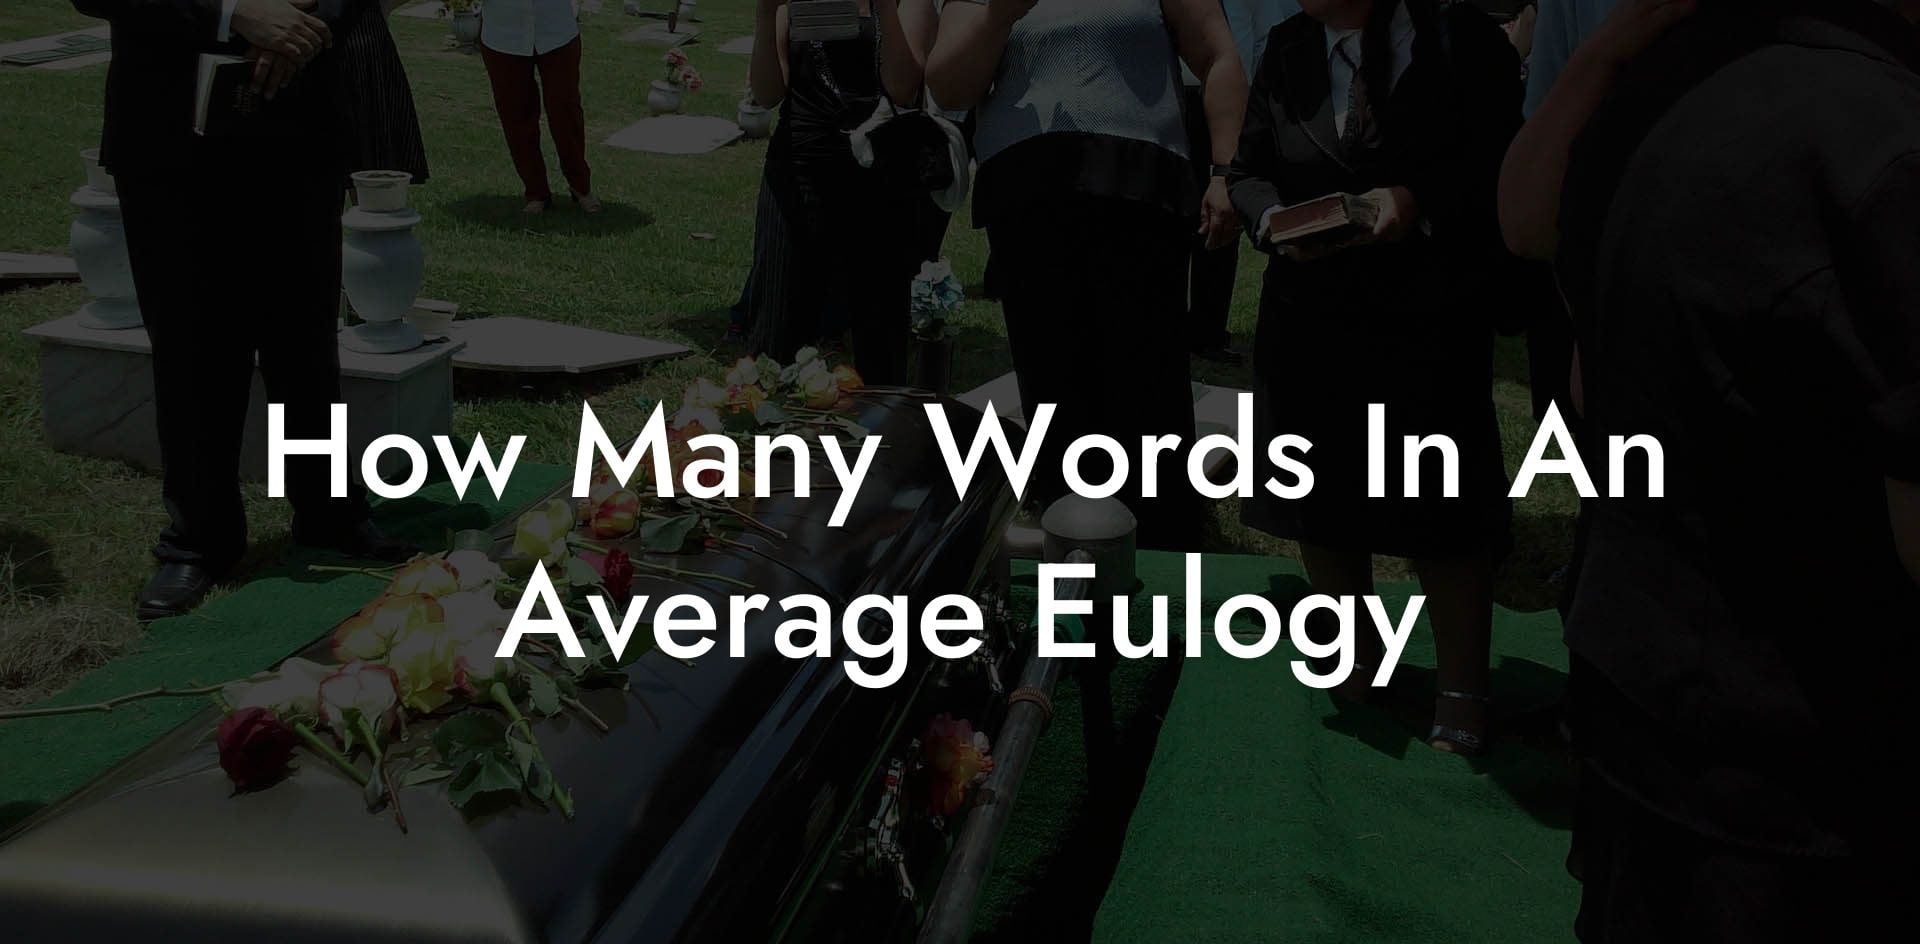 How Many Words In An Average Eulogy